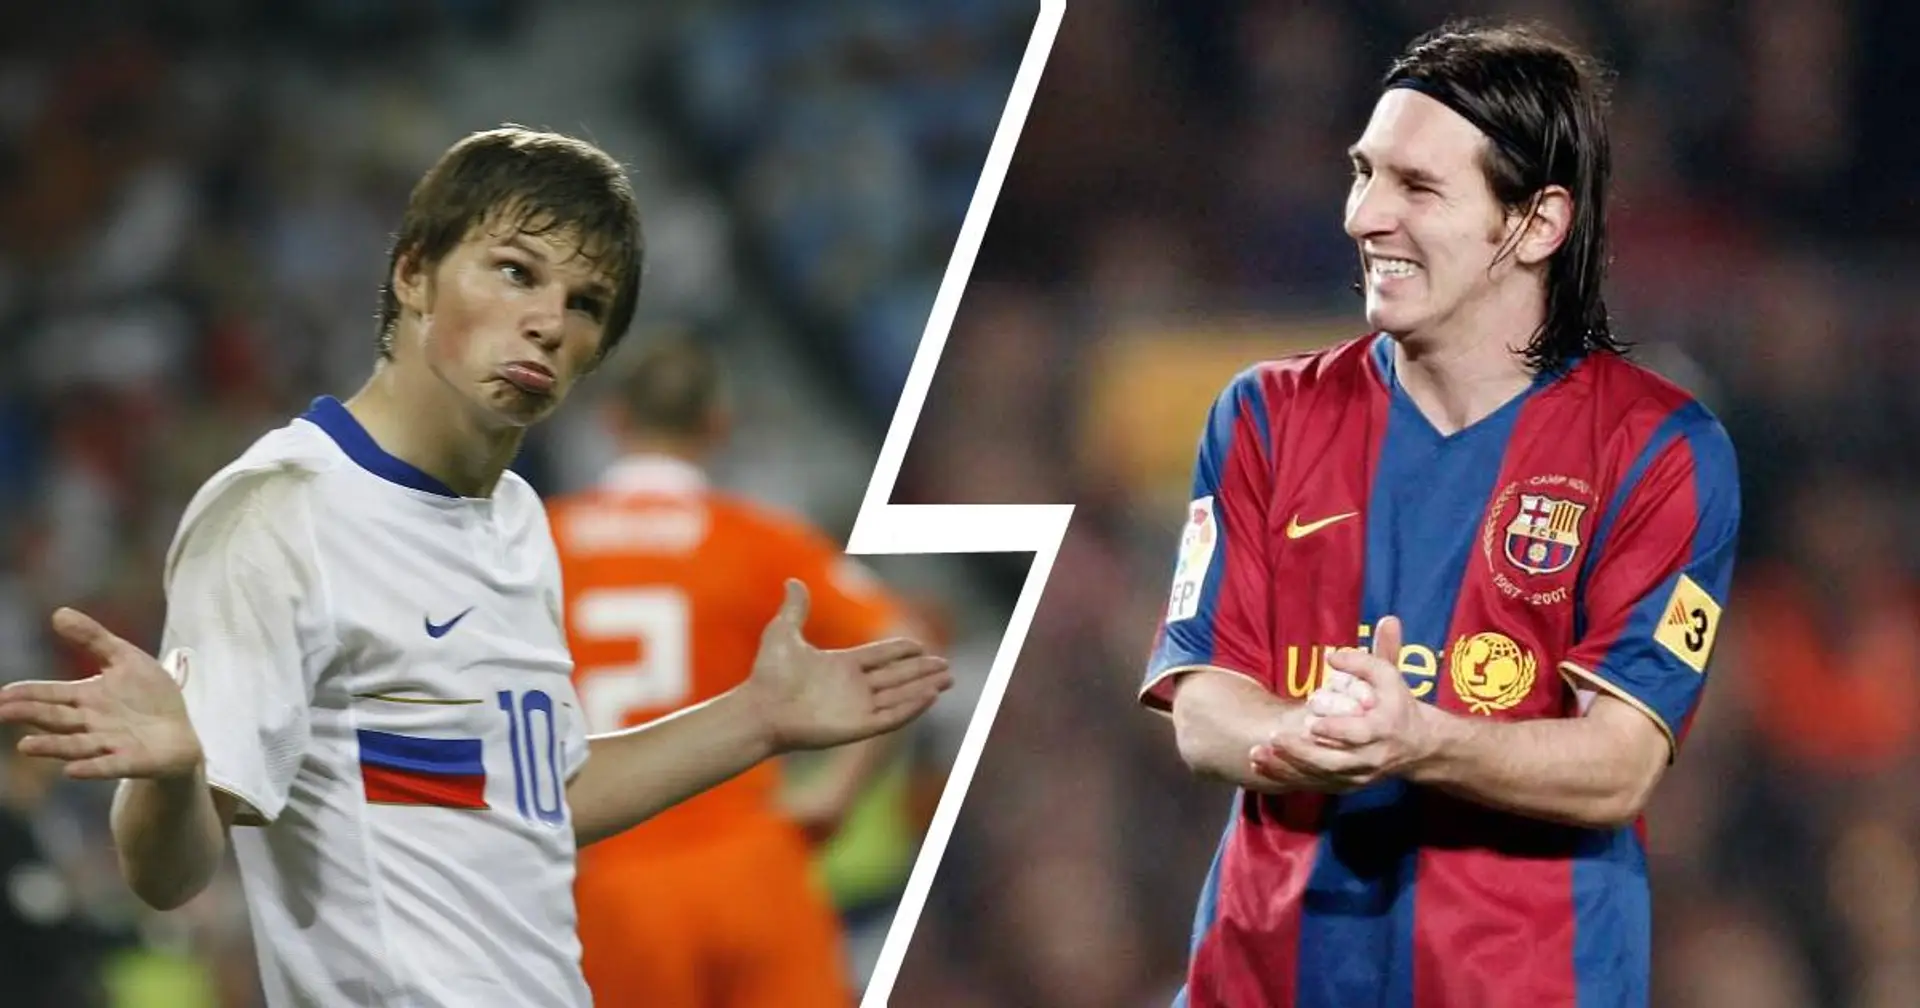 Russia's ex-forward Arshavin: Zenit wanted to swap me for Leo Messi in 2008